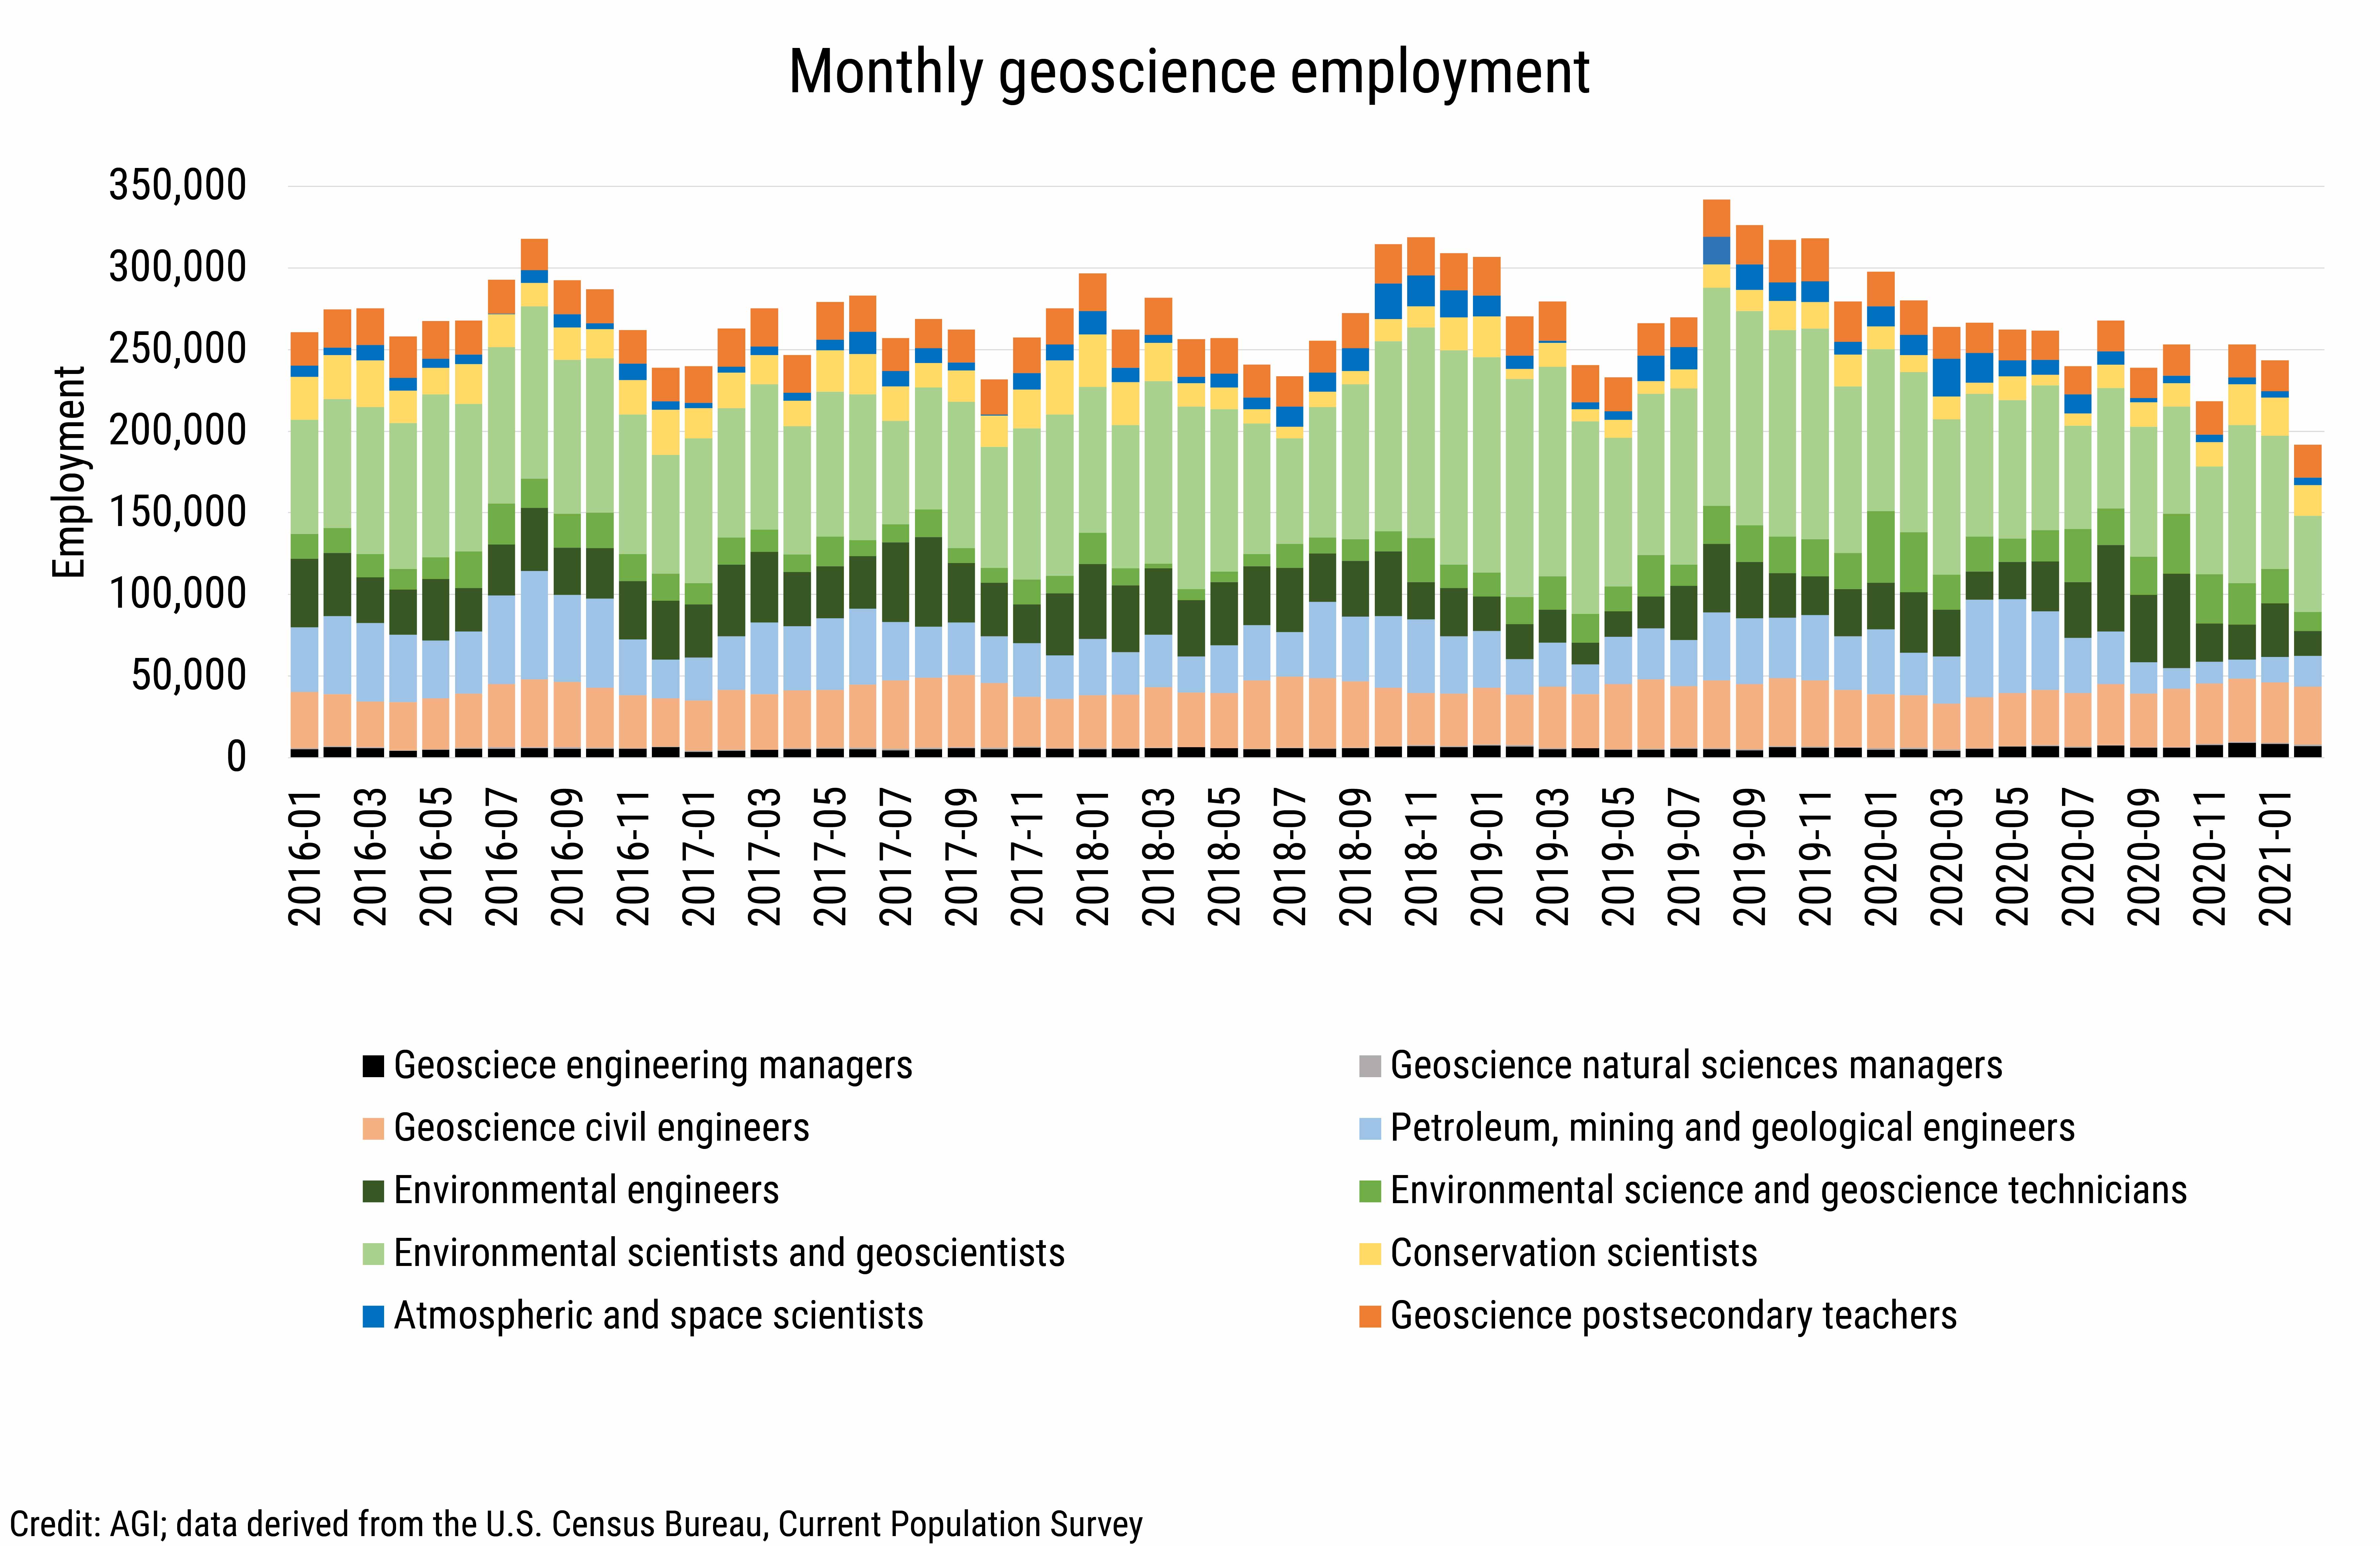 DB_2021-010 chart 01: Monthly geoscience employment (Credit: AGI, data derived from the U.S. Census Bureau, Current Population Survey)